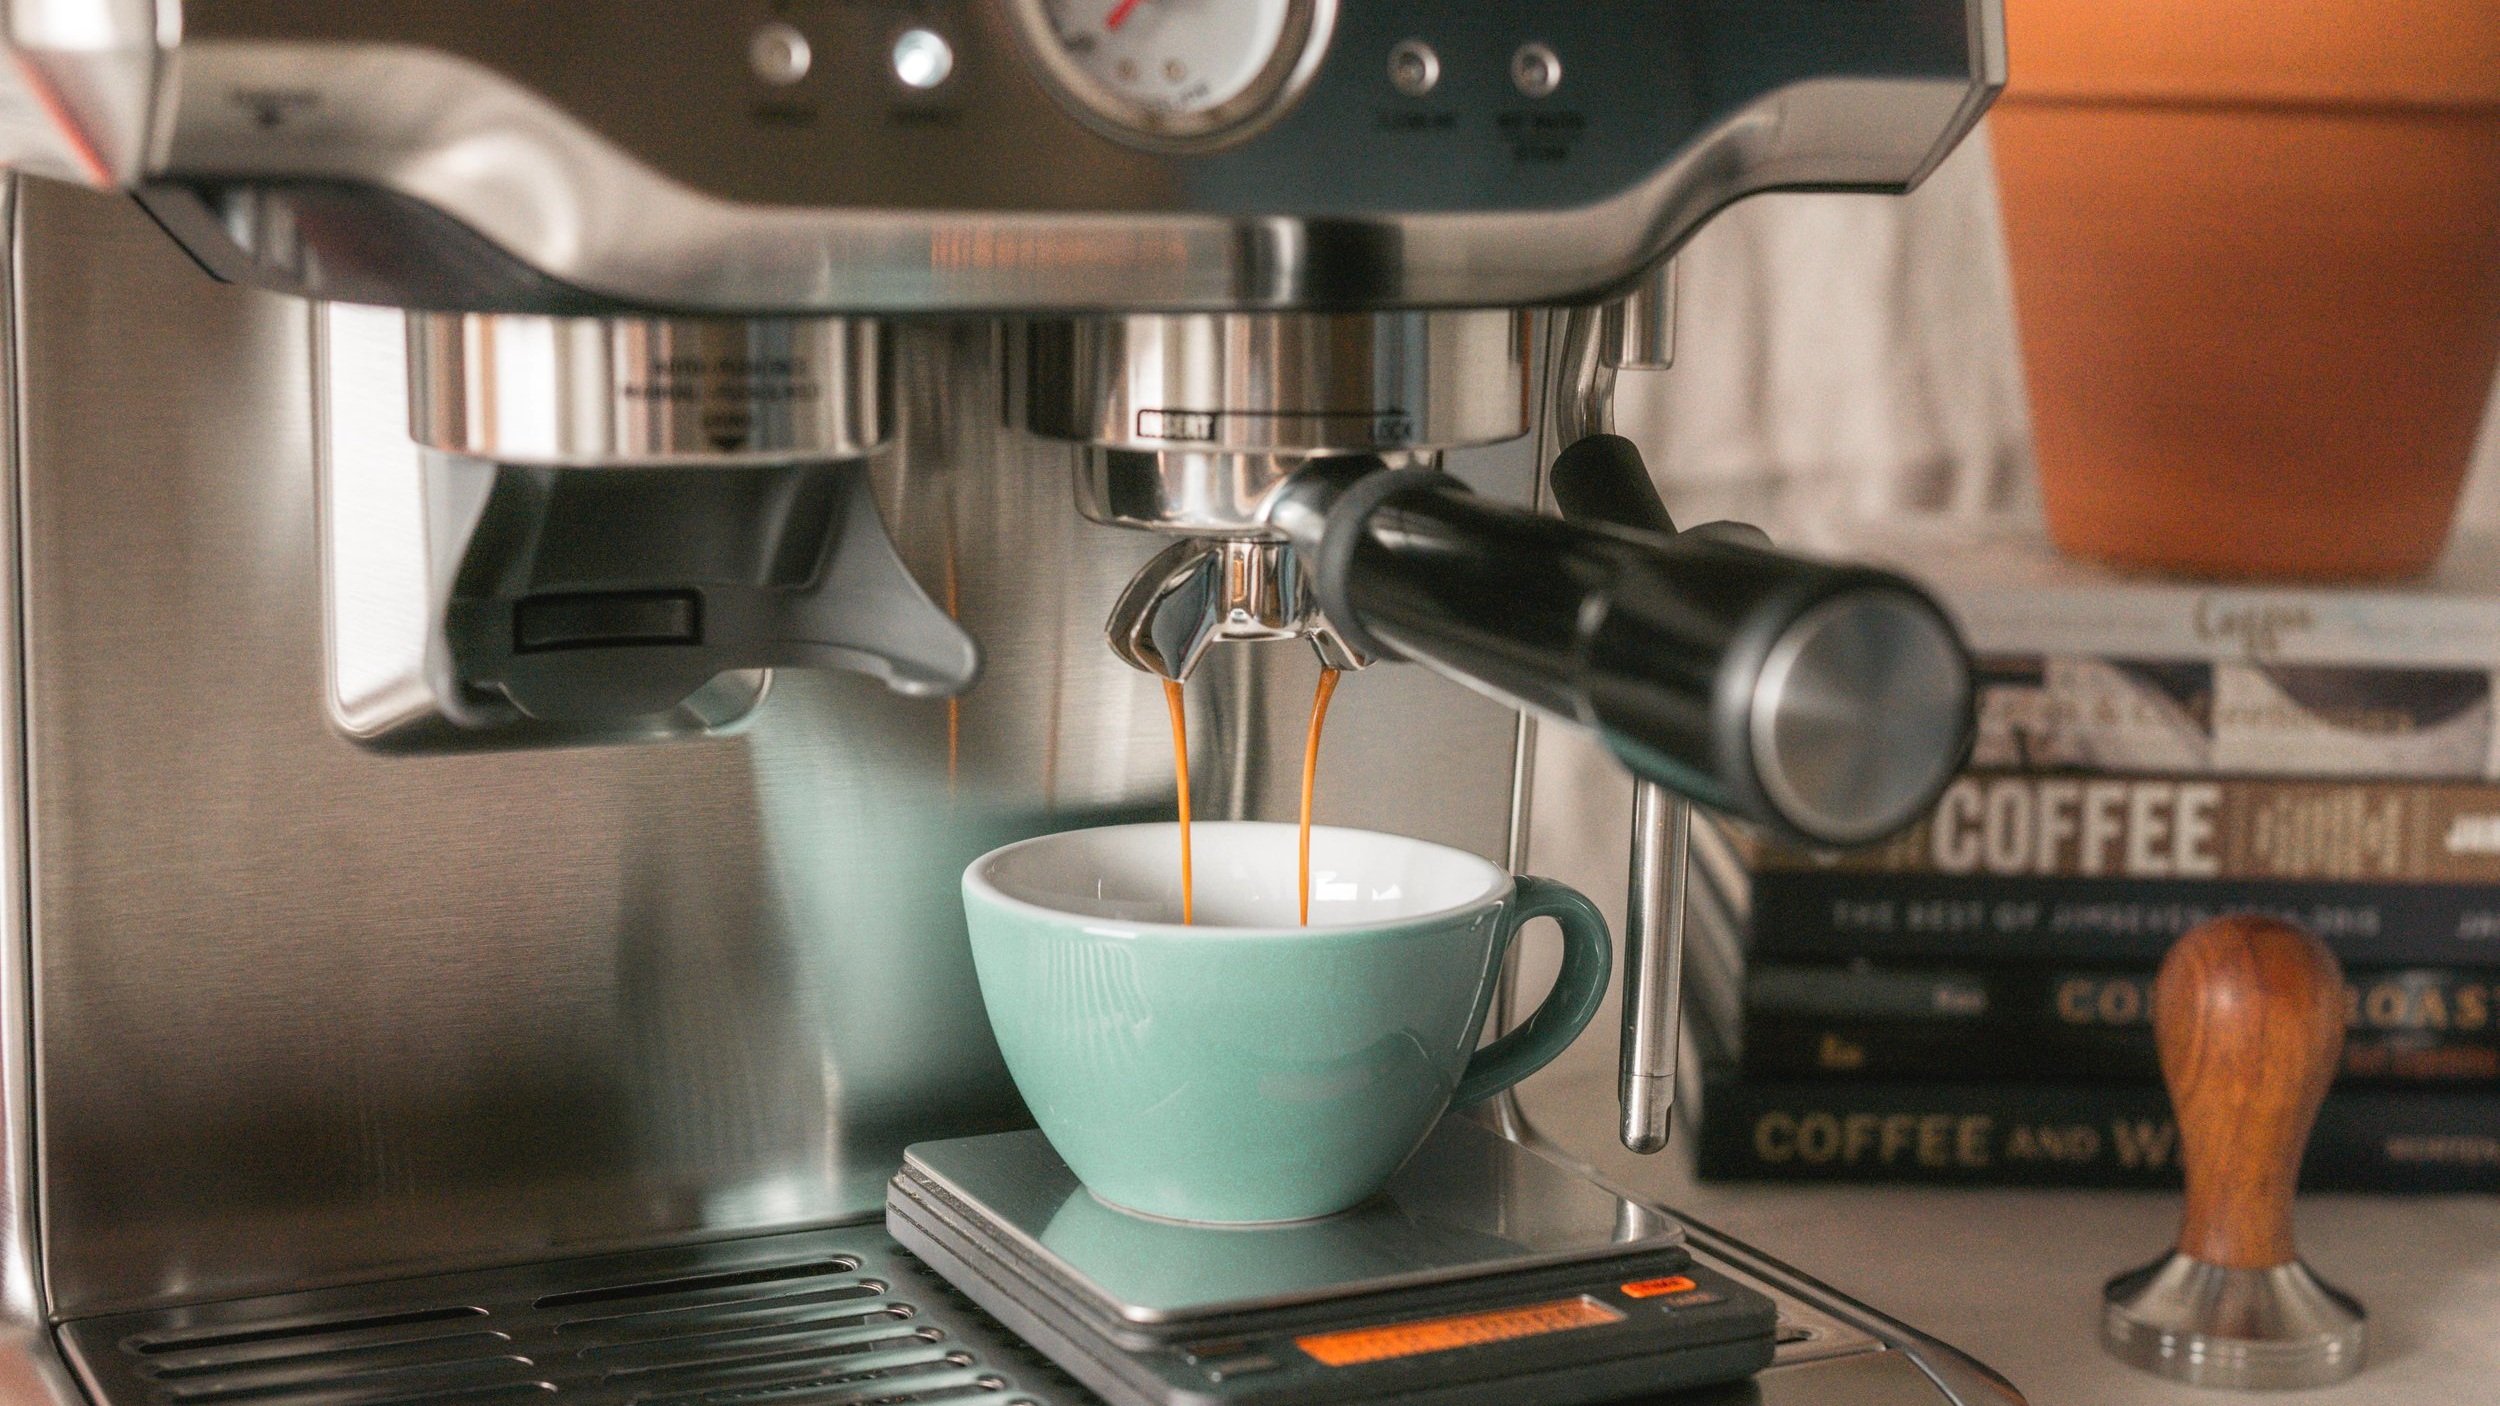 This Sage Espresso coffee machine is now unbelievably cheap